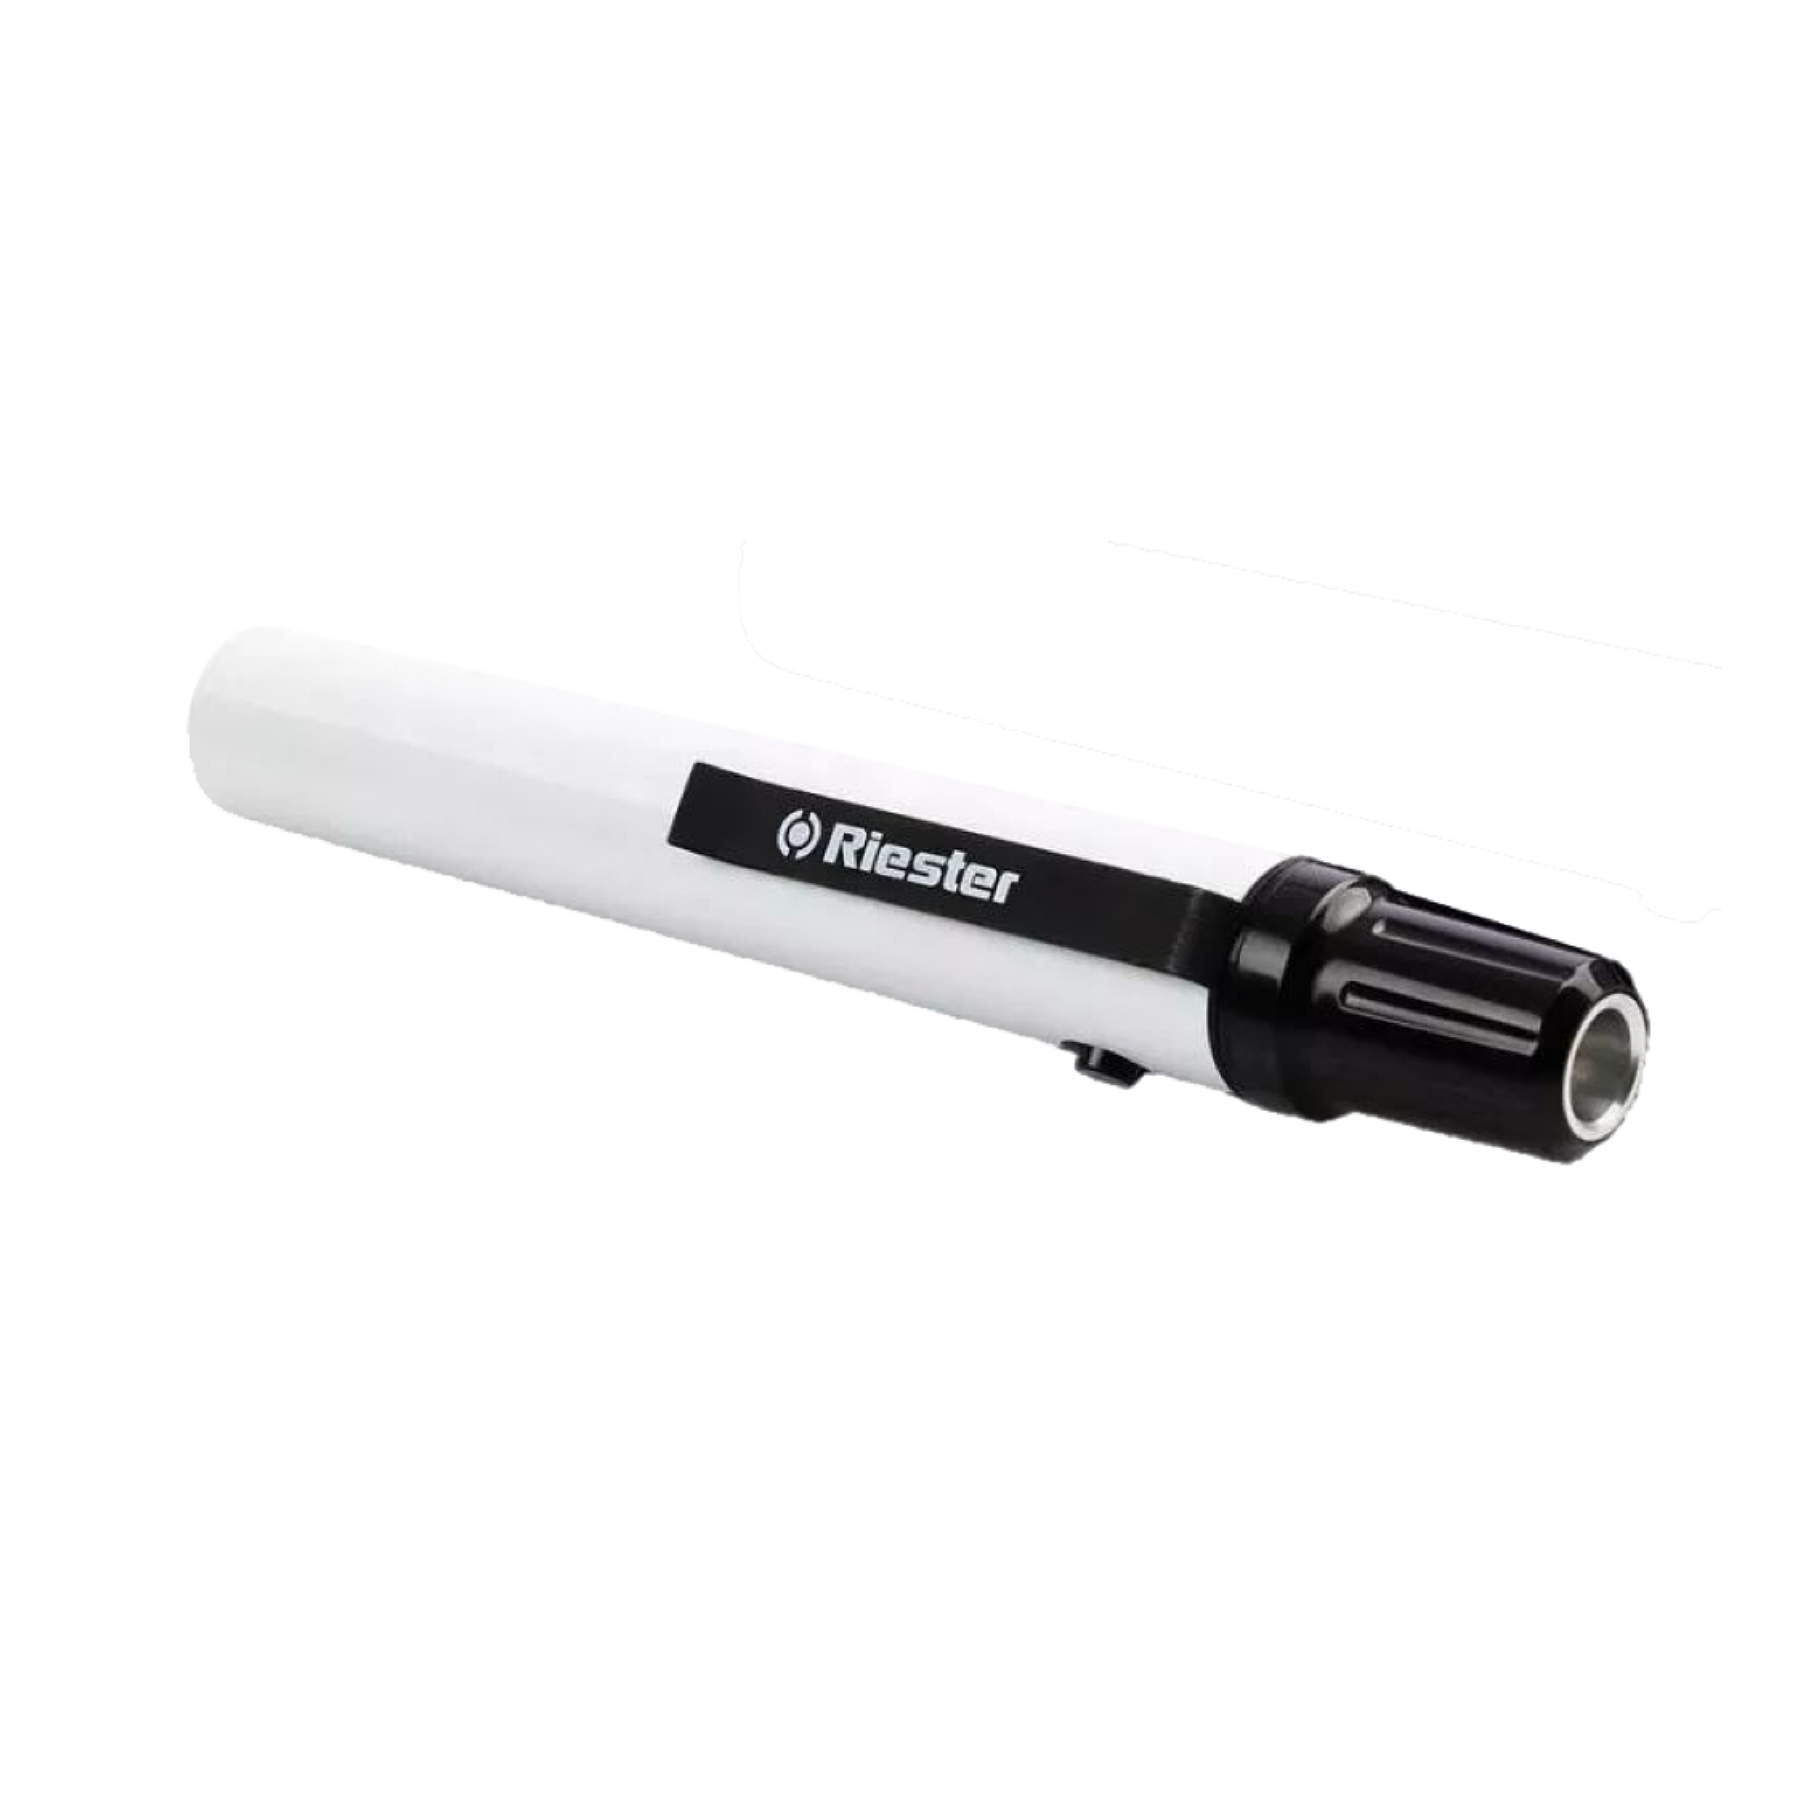 High quality Riester professional LED penlight